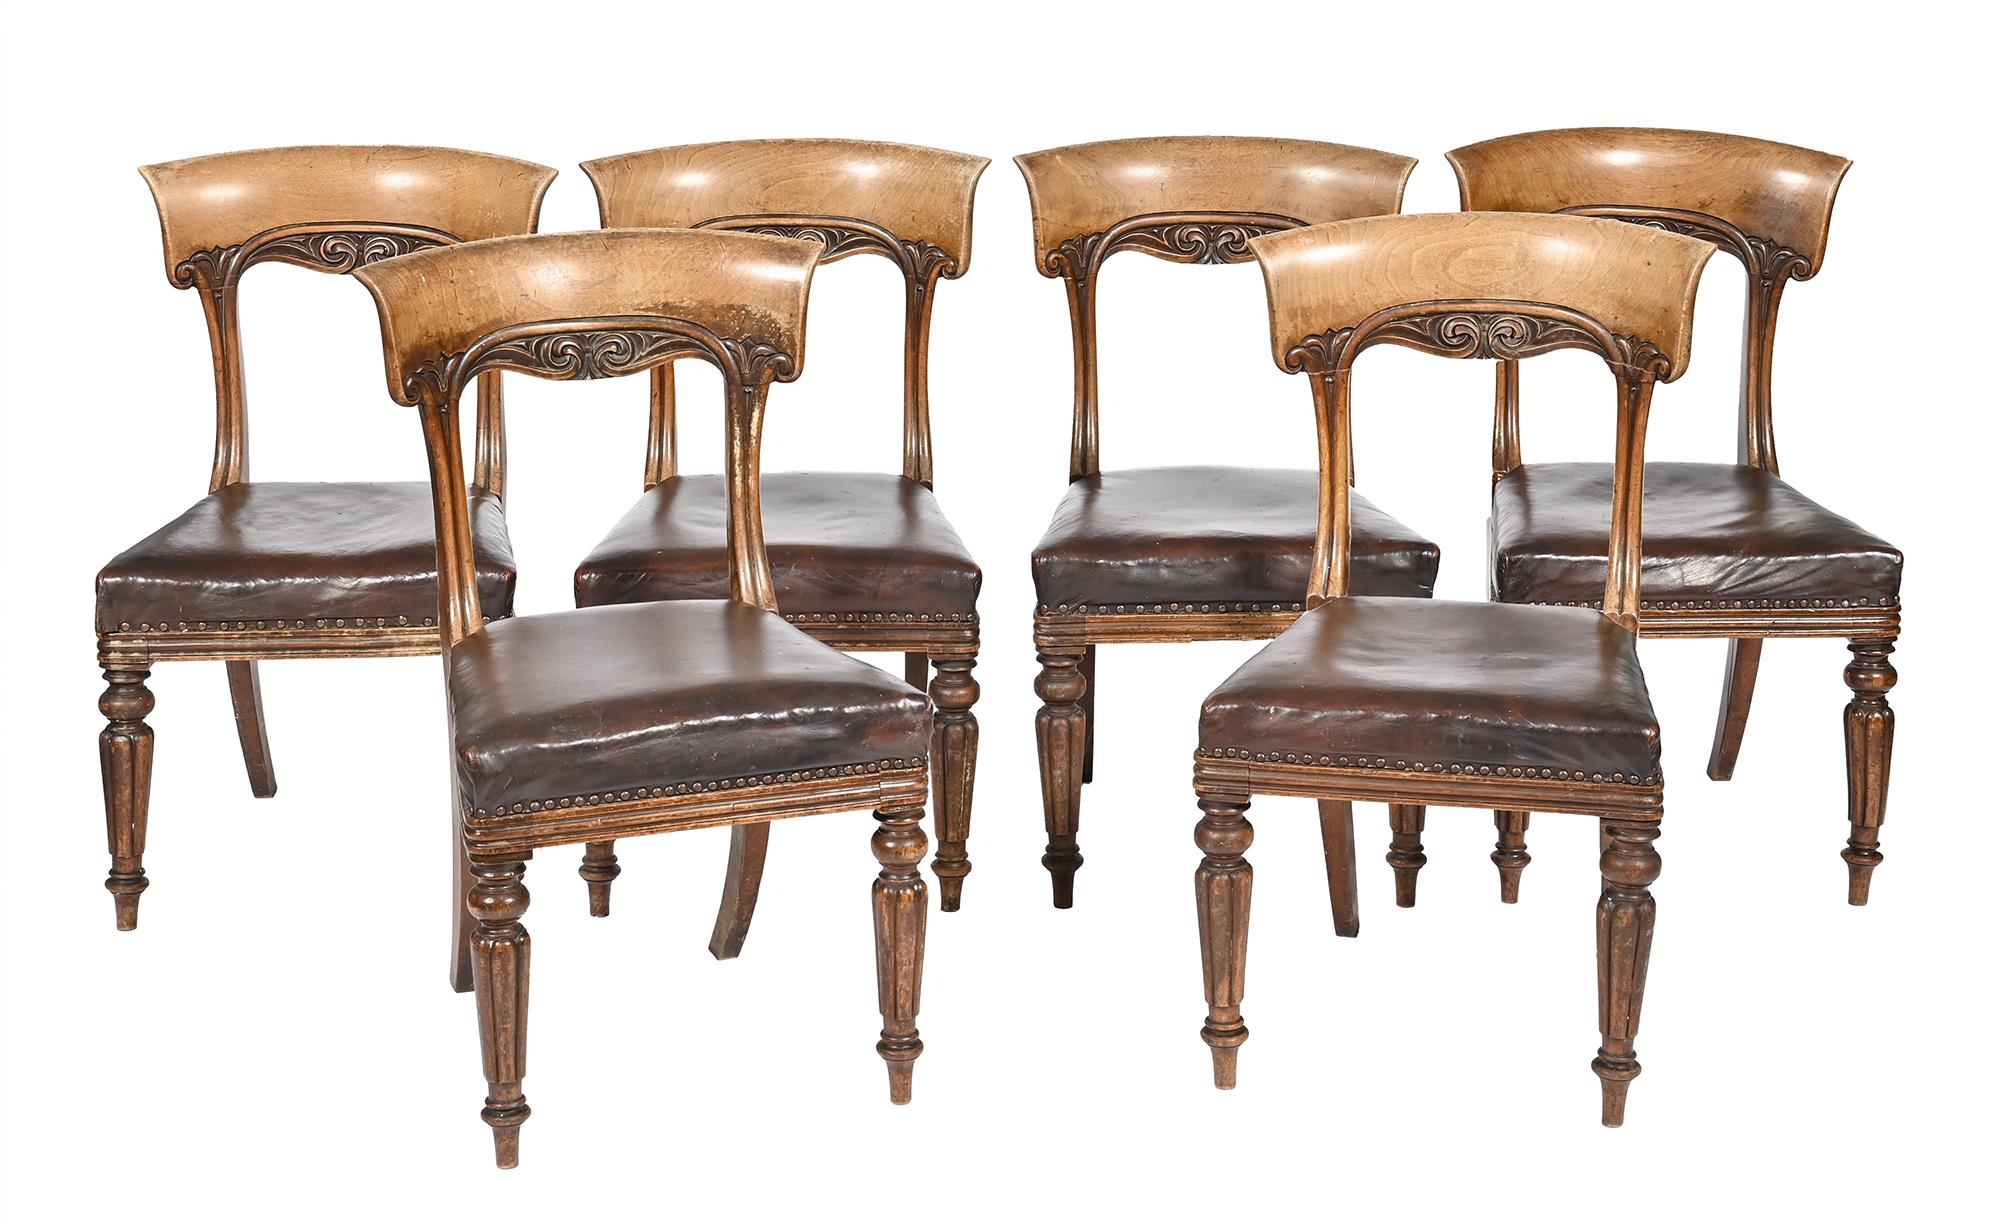 Six Victorian carved walnut dining chairs,  on reeded front legs, the seats with brown nailed